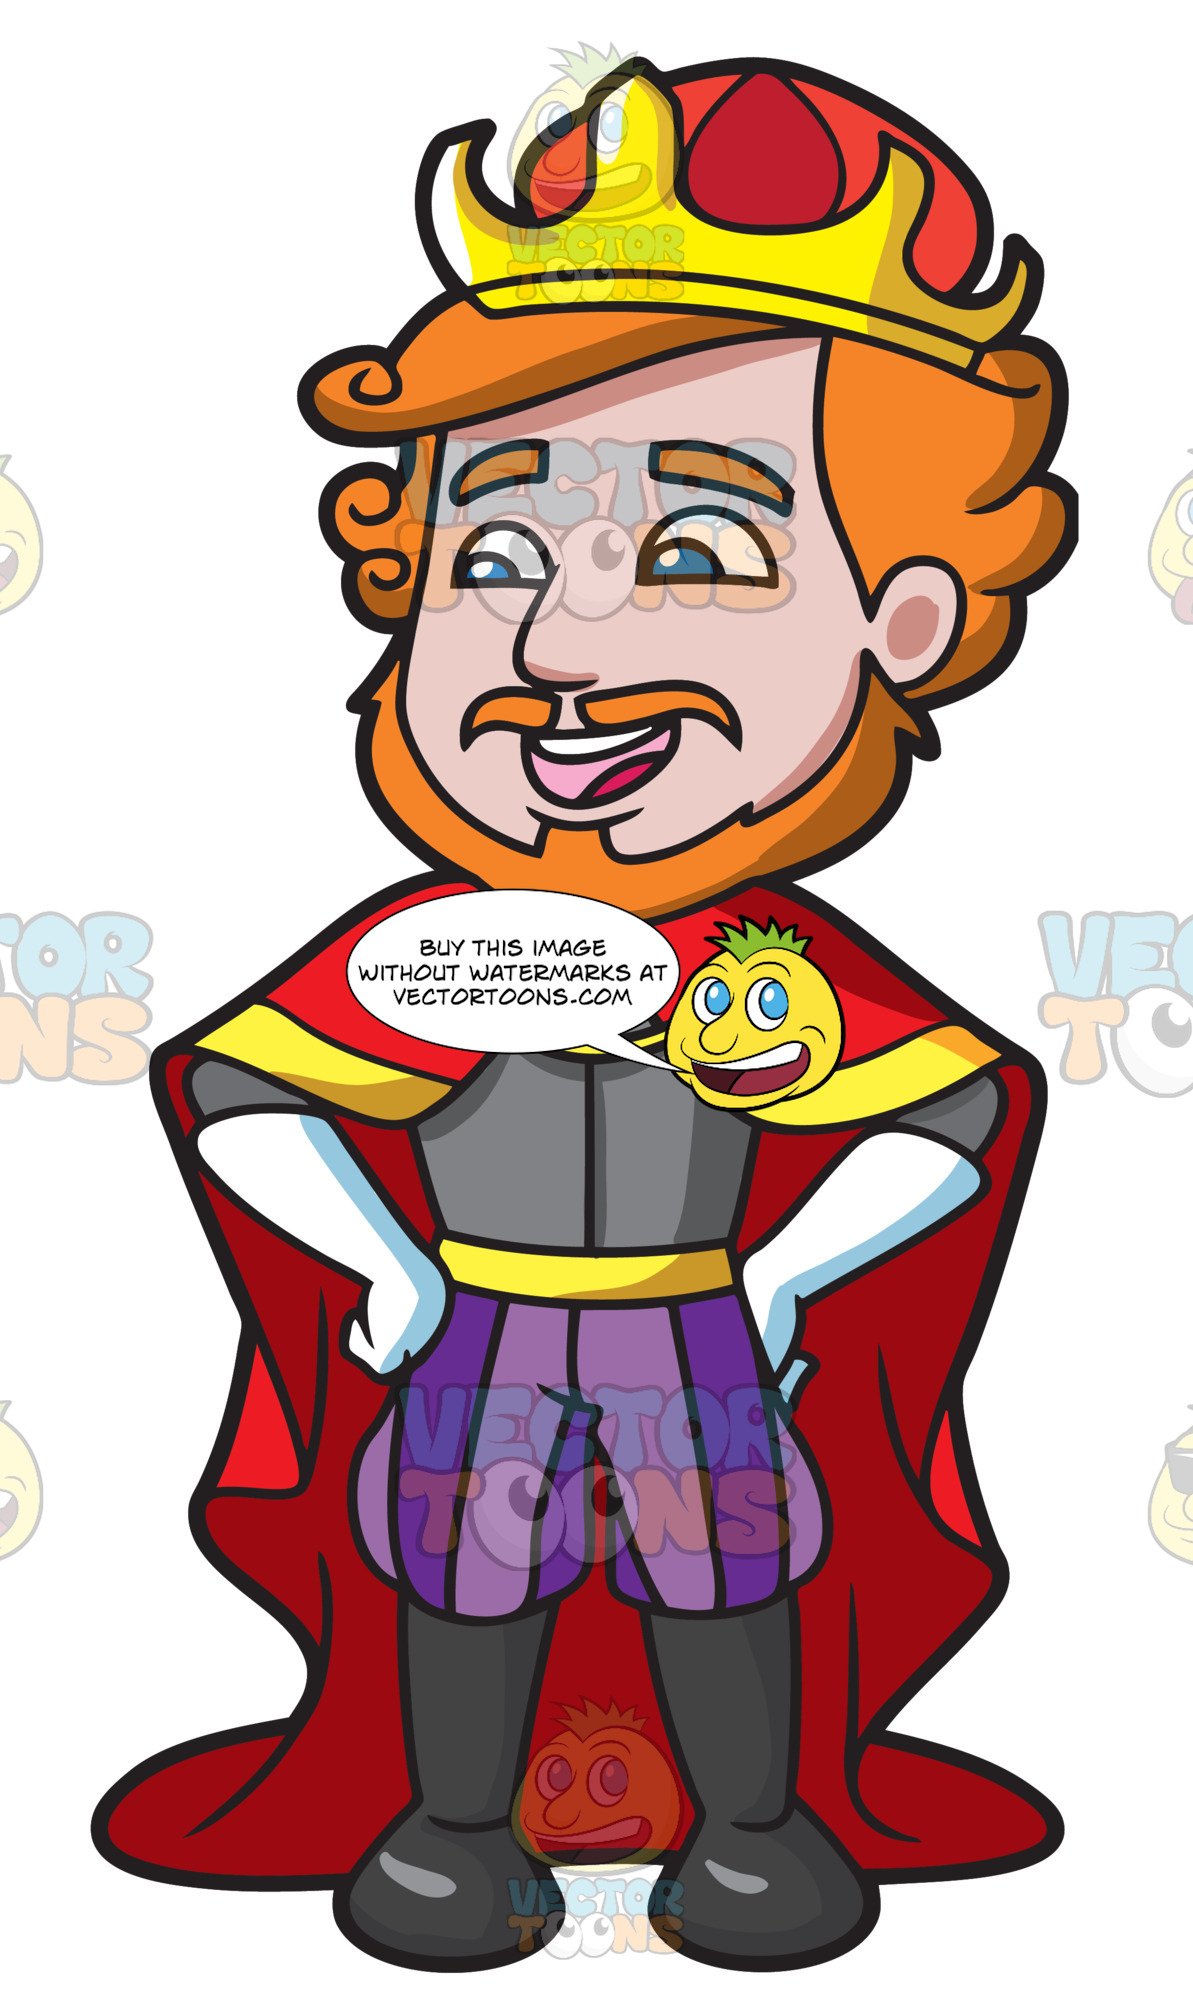 king clipart majesty